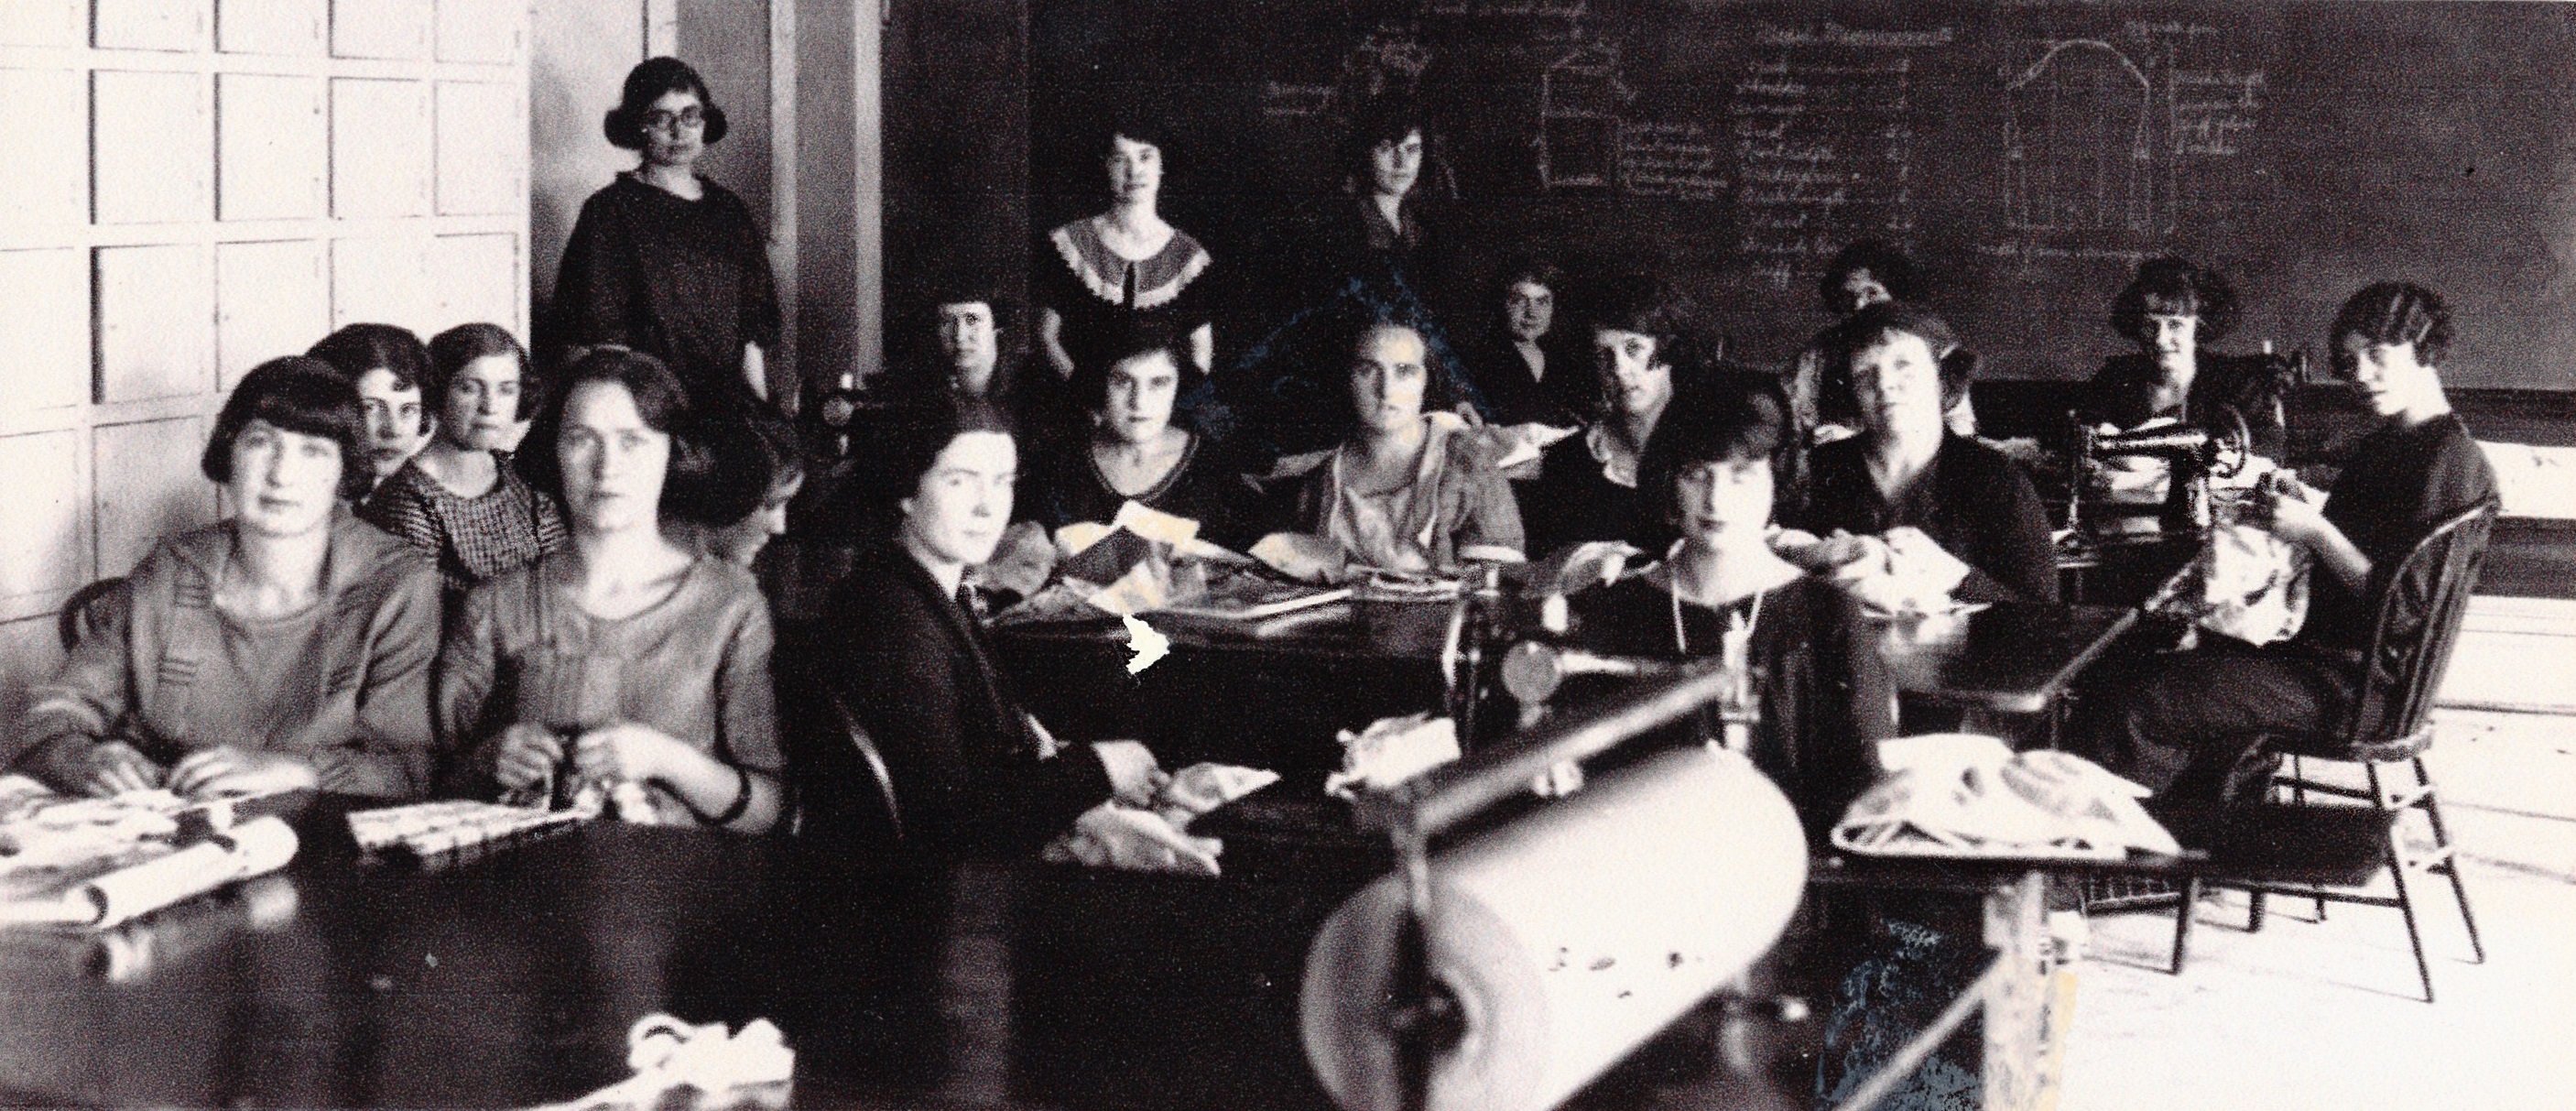 A home economics class at the Dixie Academy in 1926